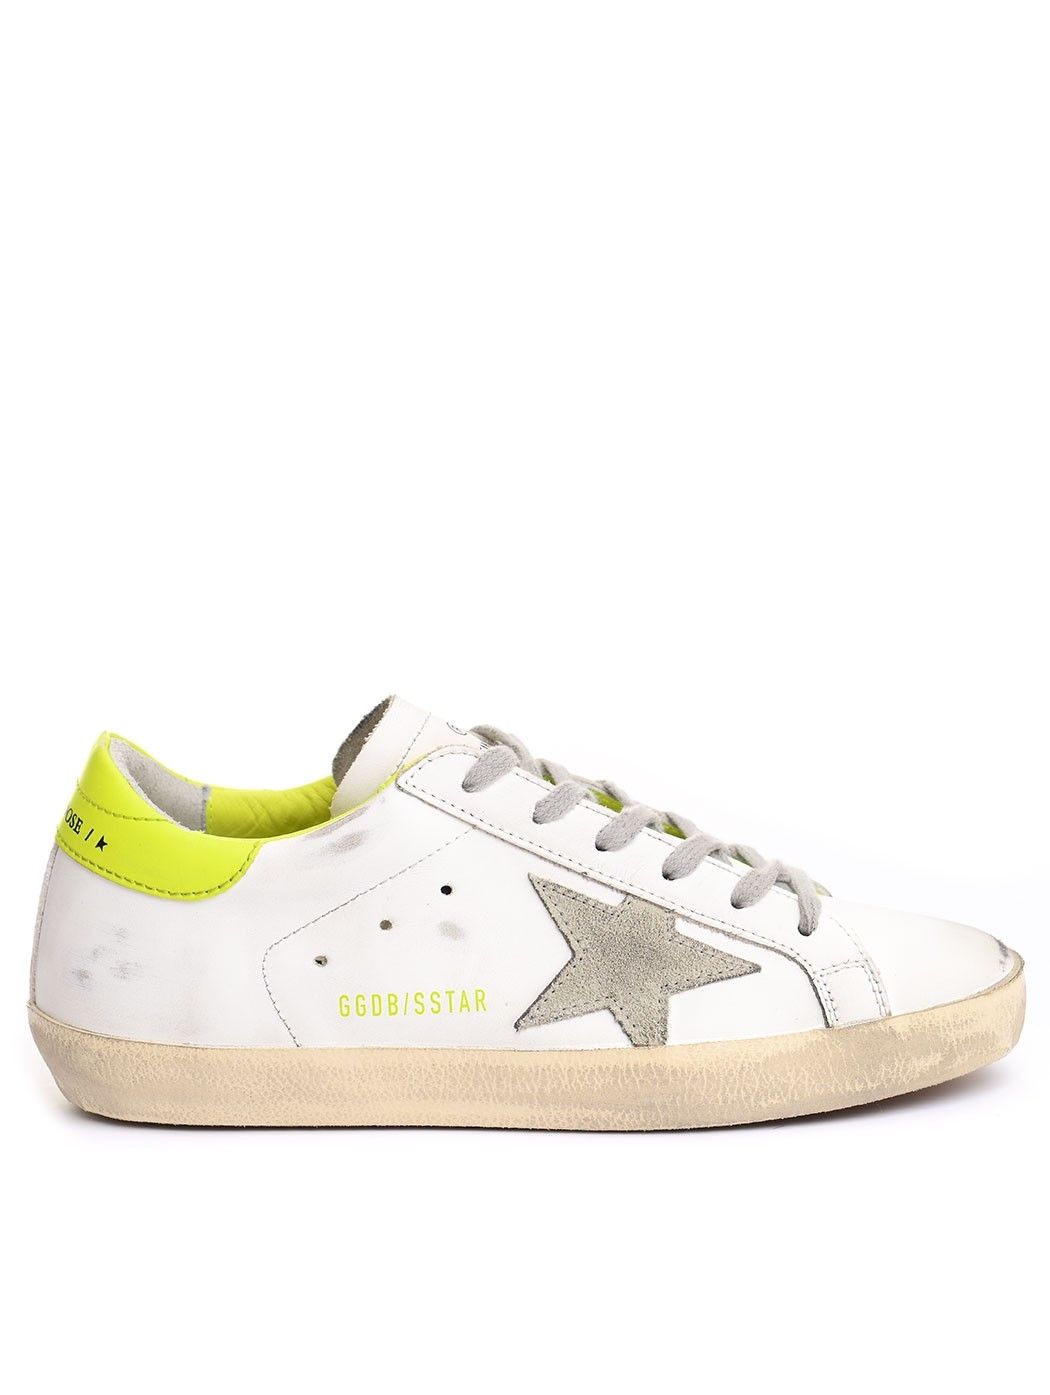  WOMAN SHOES,GIVENCHY SHOES,GOLDEN GOOSE SHOES,MARNI SHOES  GOLDEN GOOSE GWF00101